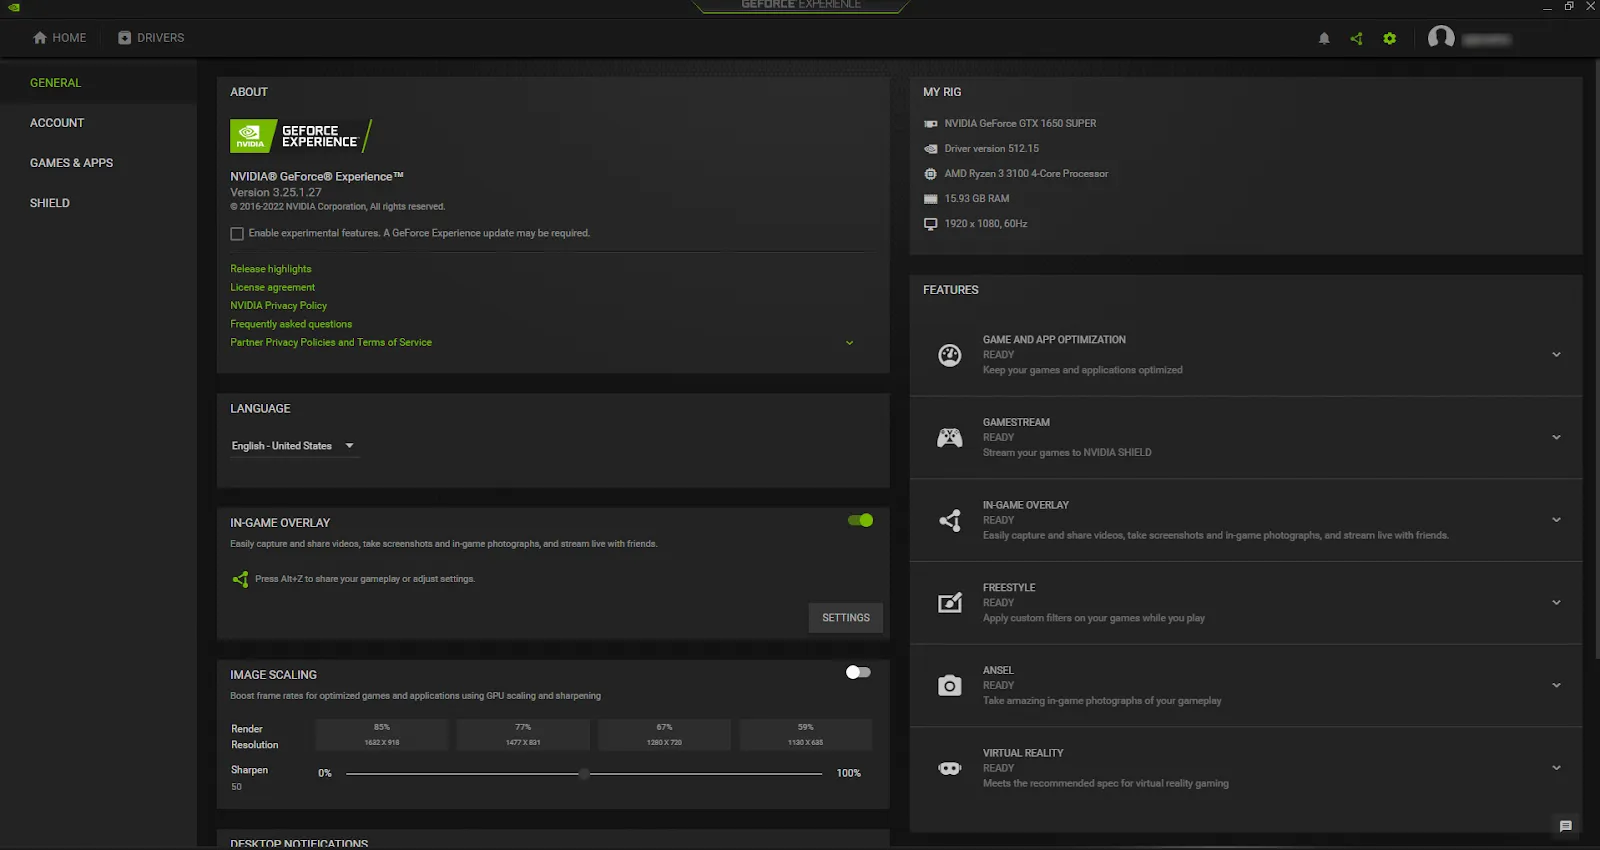 You'll also need to register an account to use GeForce Experience.